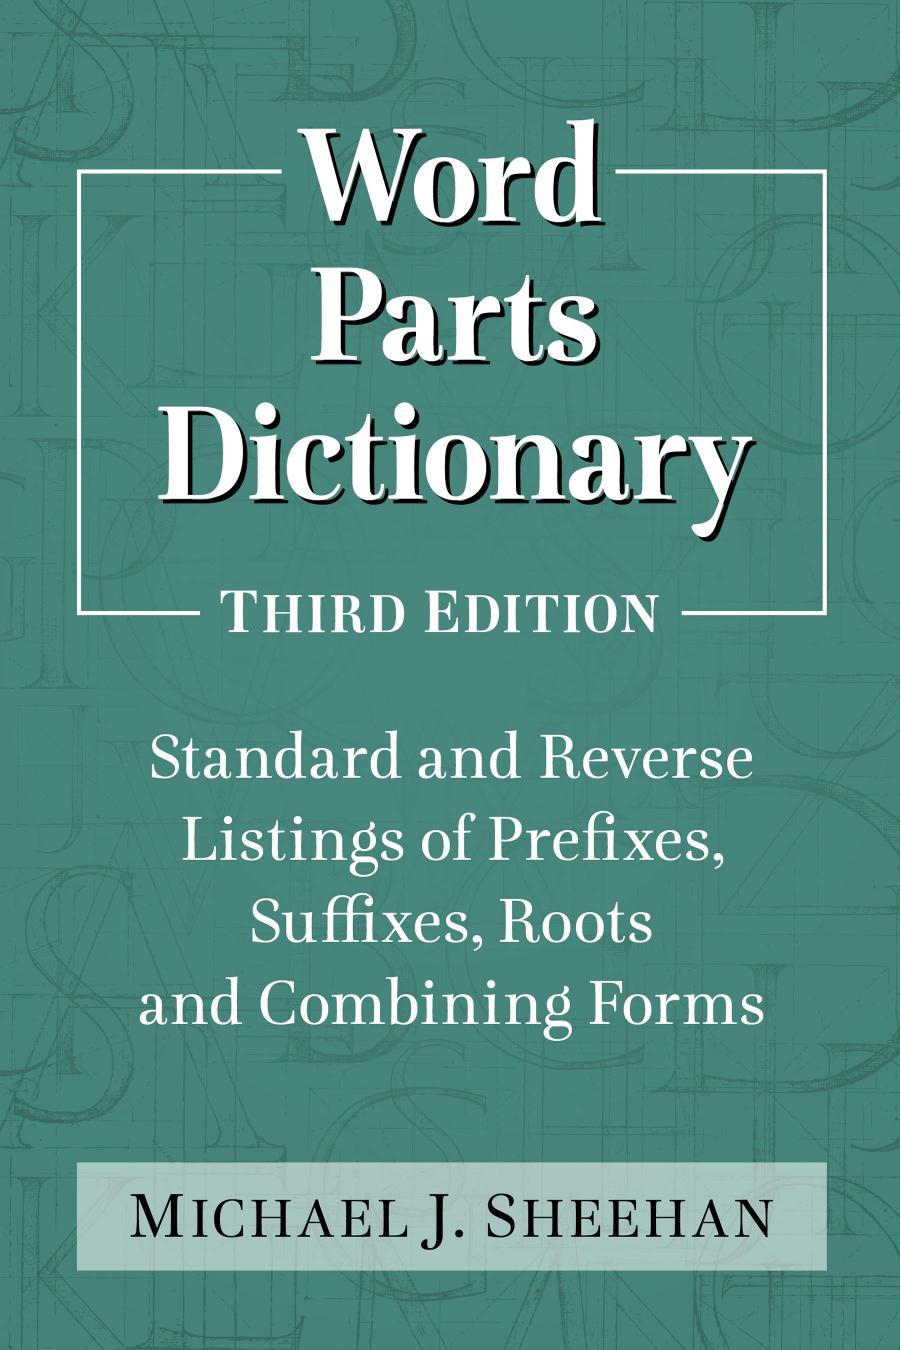 Word Parts Dictionary by Michael J. Sheehan;